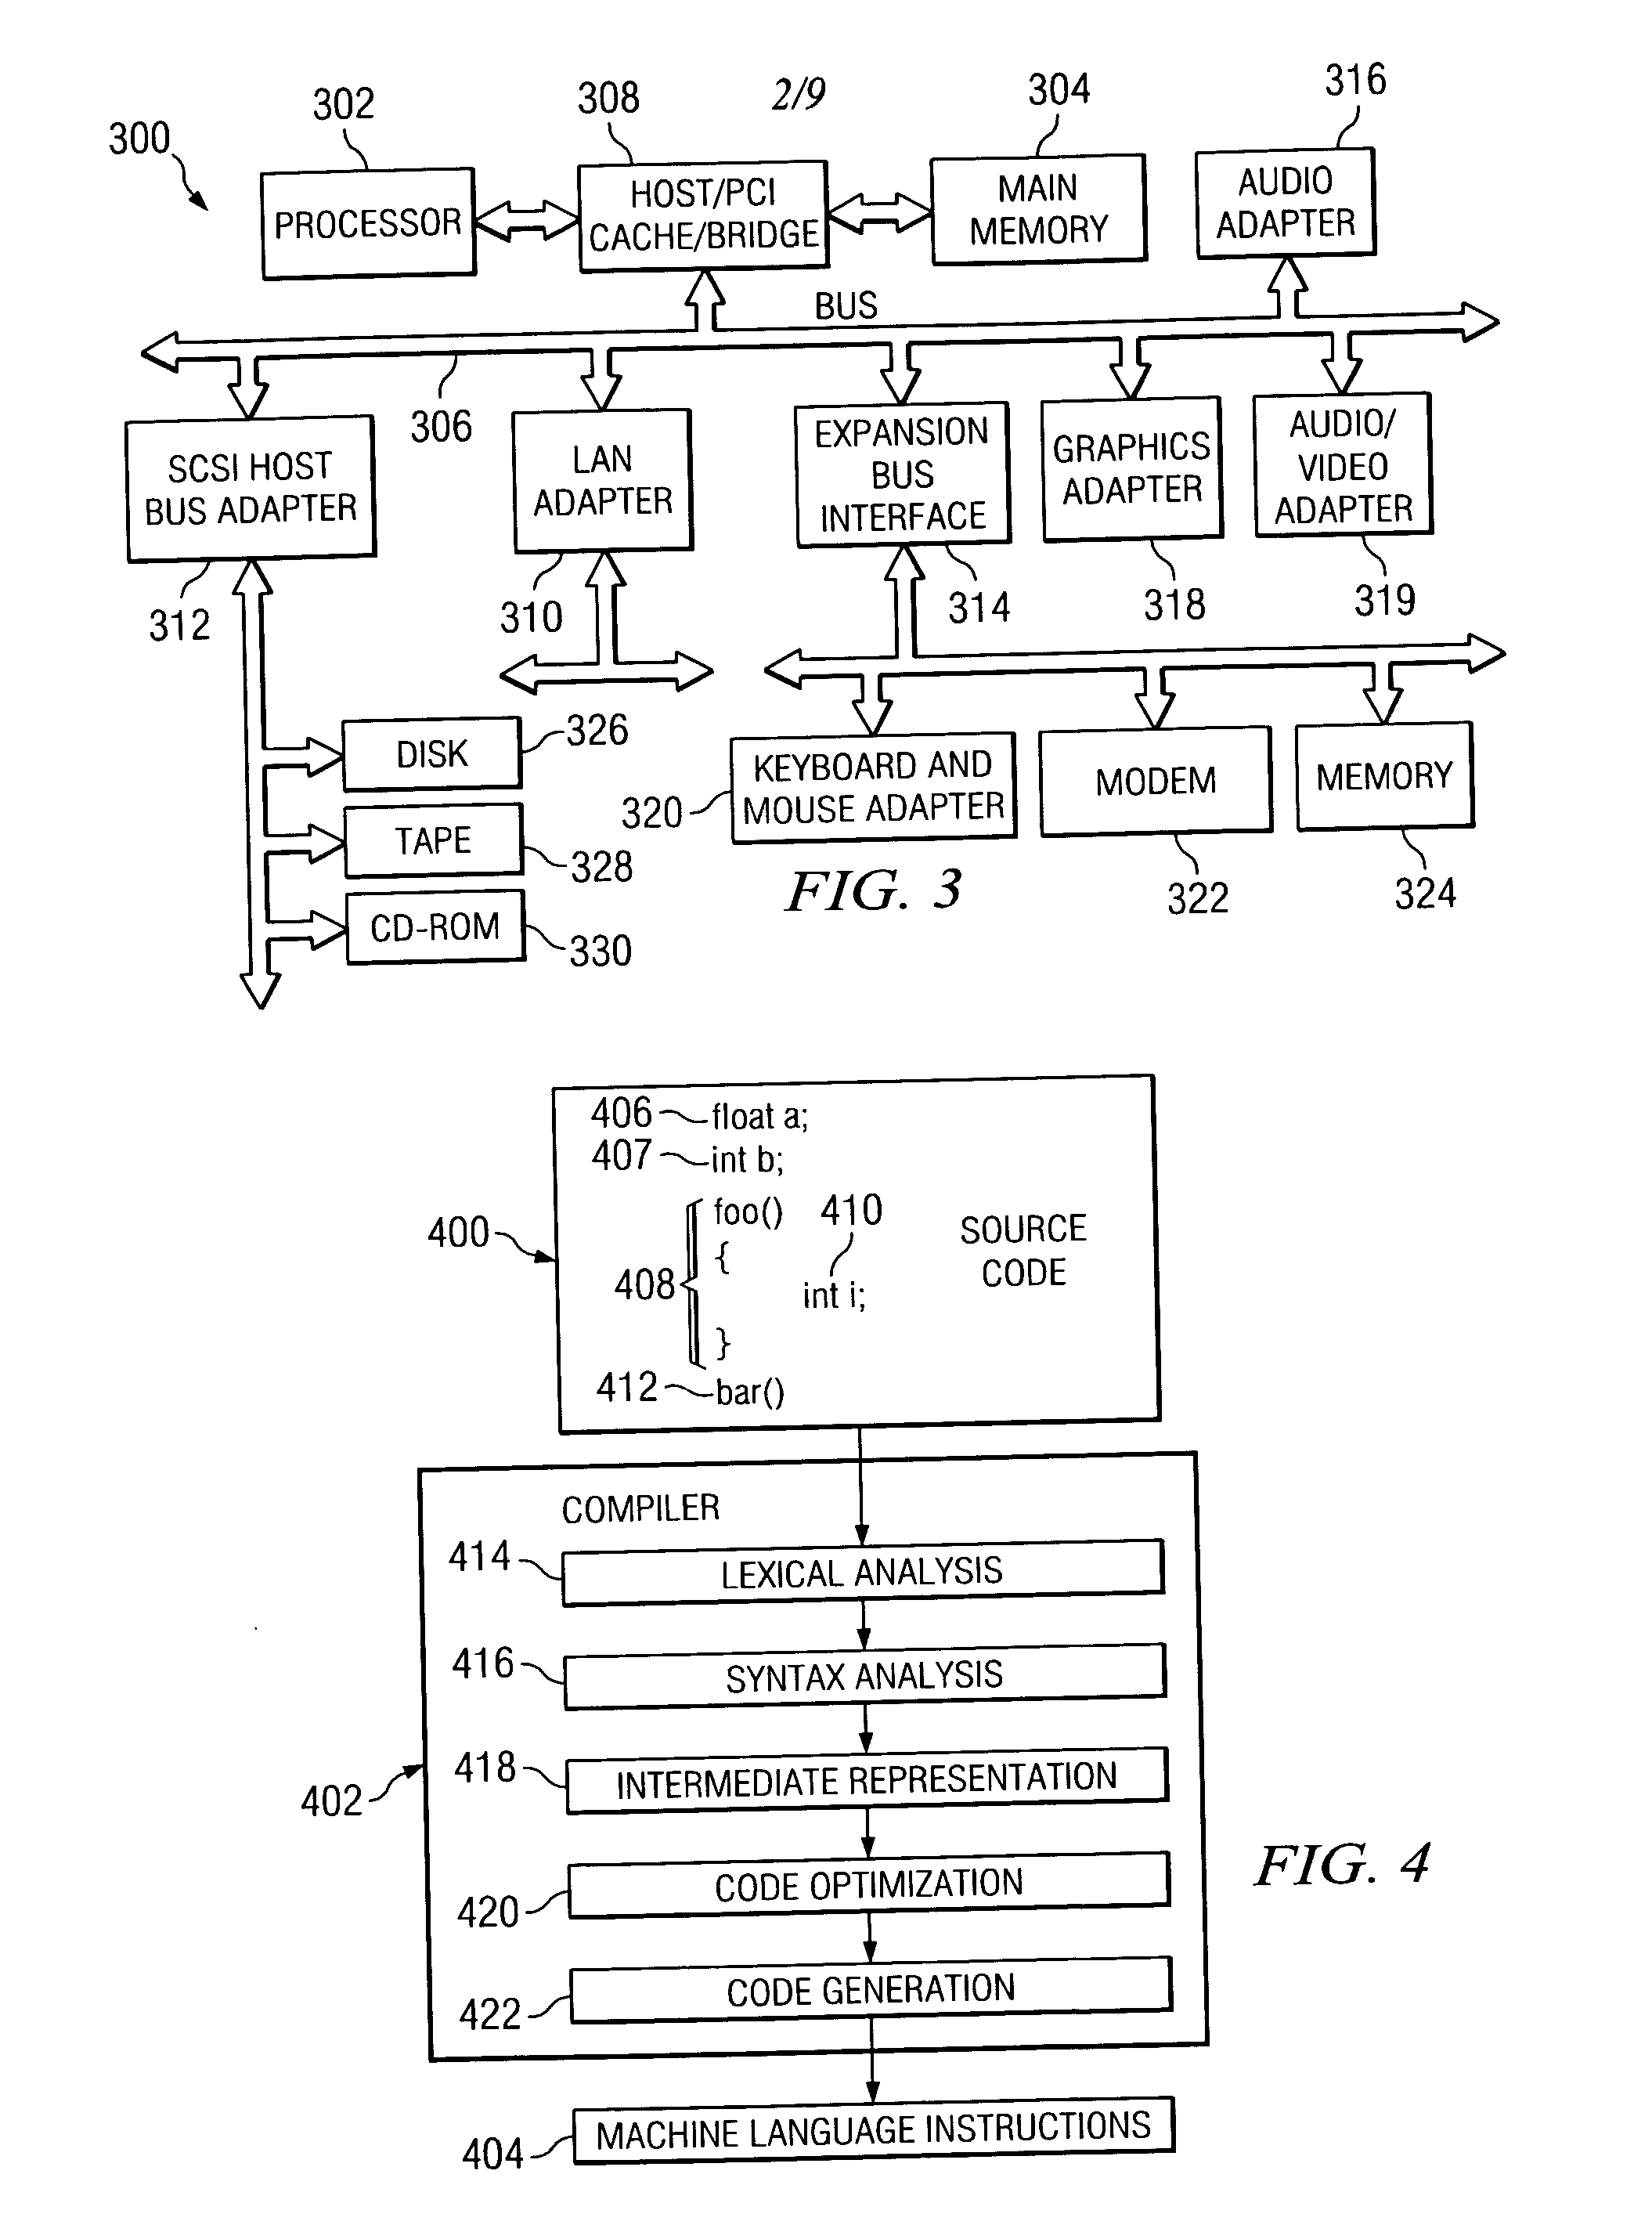 Method and apparatus for optimizing software program using inter-procedural strength reduction